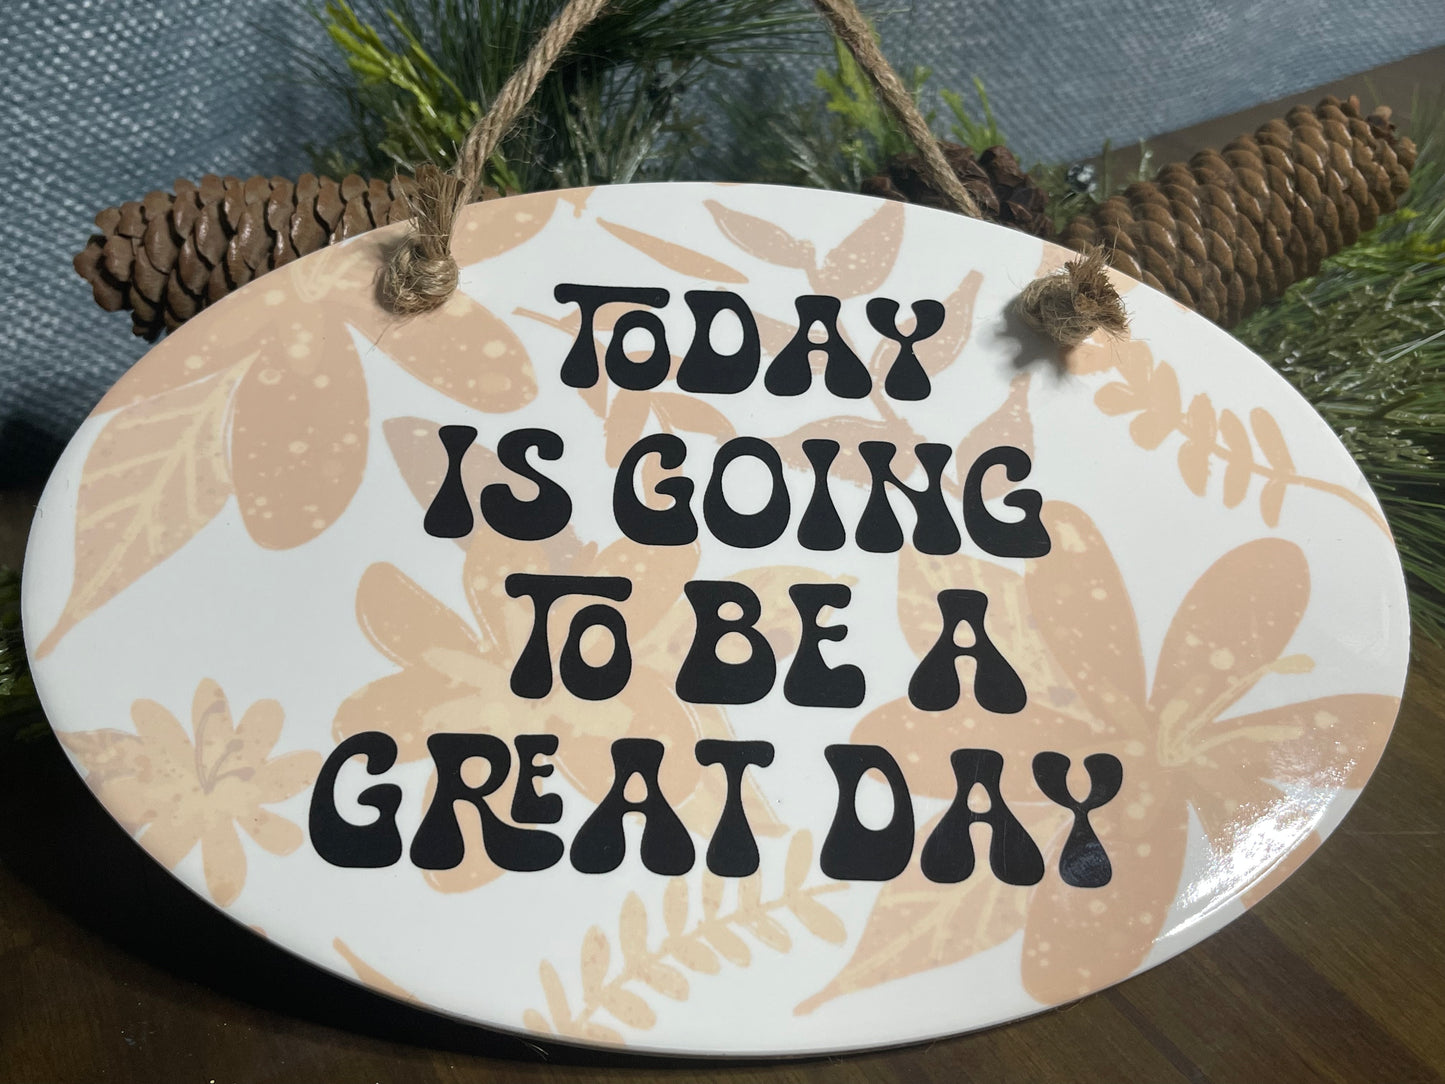 Ceramic Plaque - Today is going to be a great day Oval Ceramic Plaque